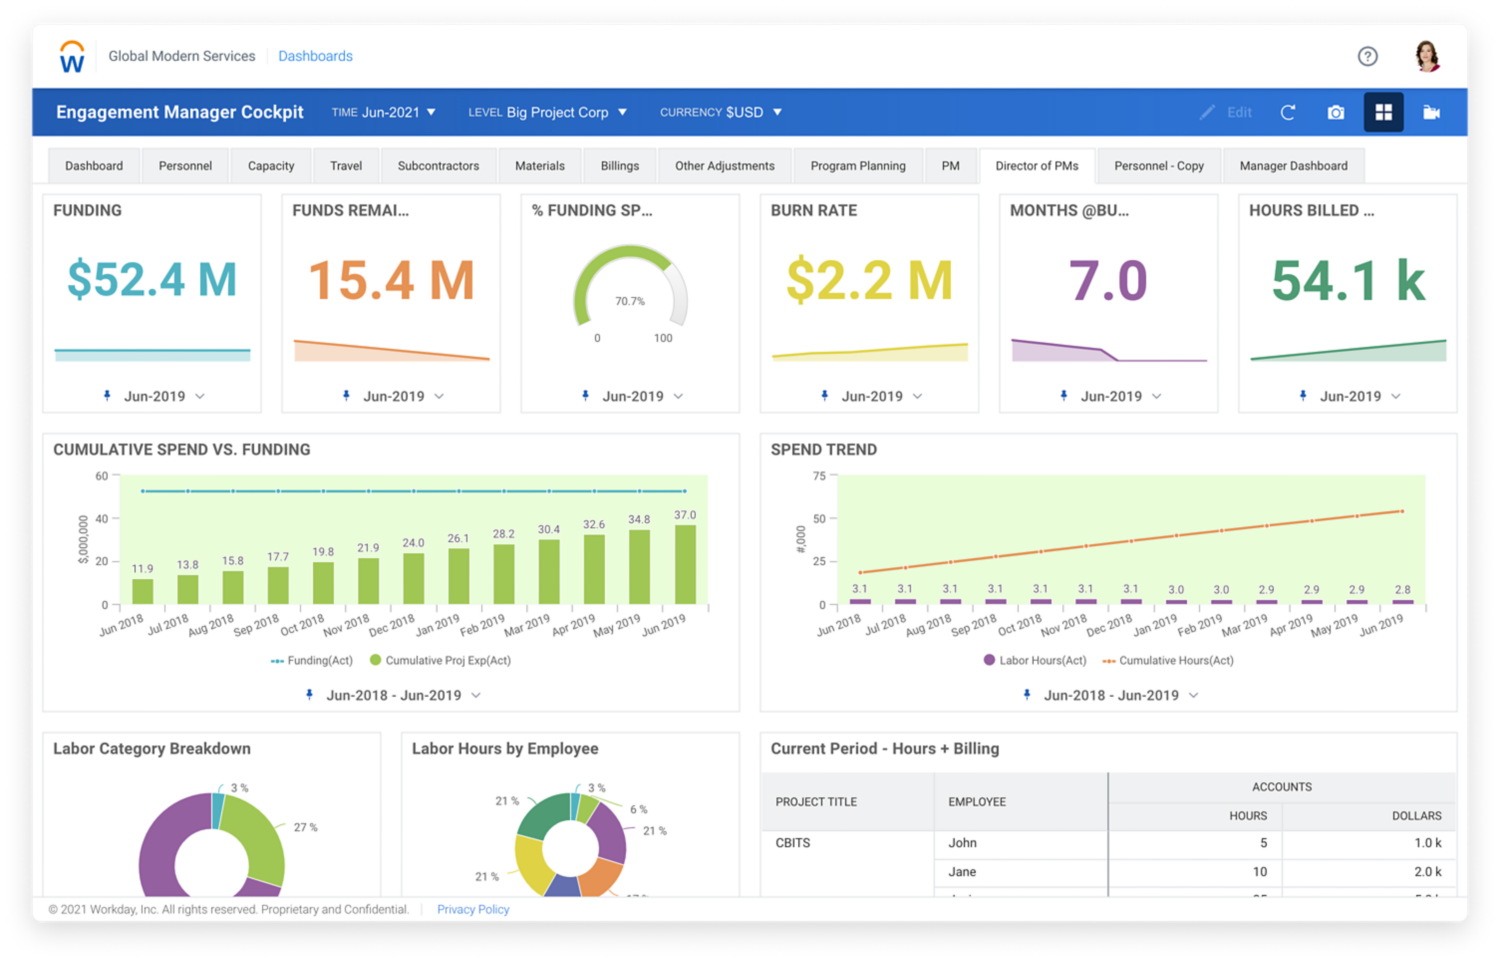 Marketing planning dashboard in Workday Adaptive Planning, showing numerical values to analyse marketing pipeline by region, quarter and spend.